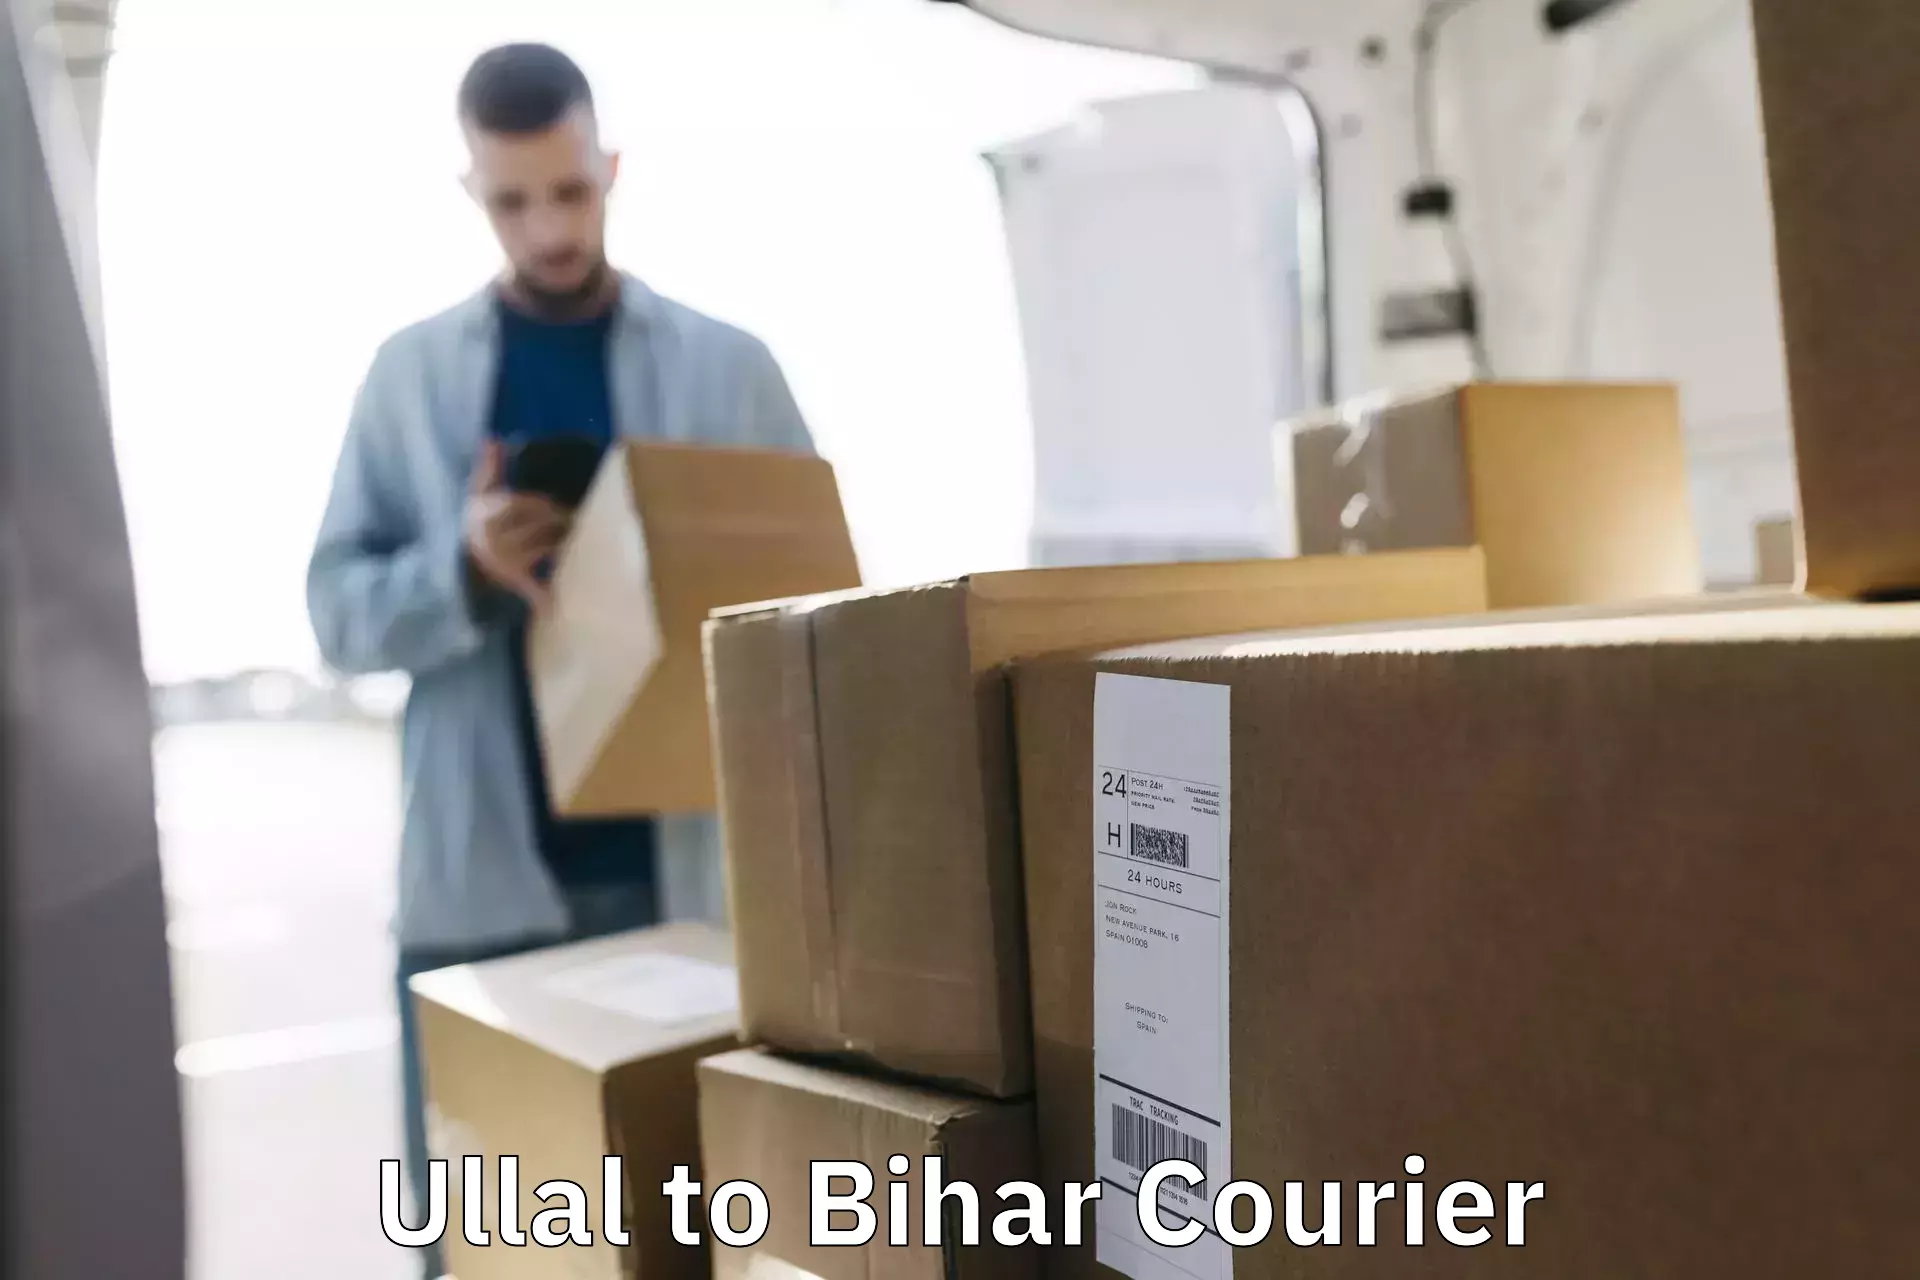 Business delivery service Ullal to Piro